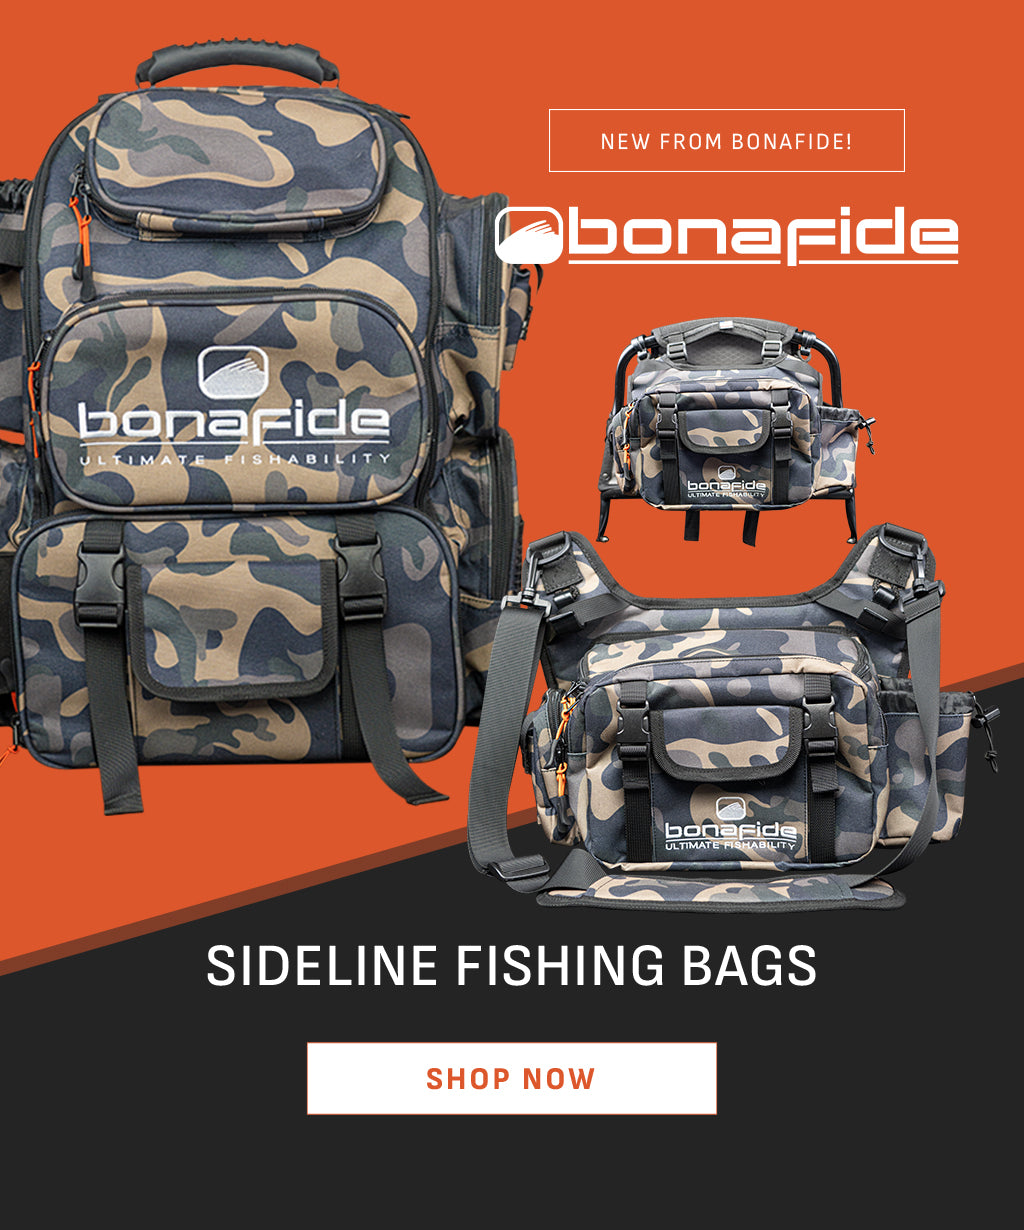 New From Bonafide®! The Bonafide Sideline Fishing Bags: The Last Fishing Bag You'll Ever Need. Now Available in 3 Styles. Shop Now